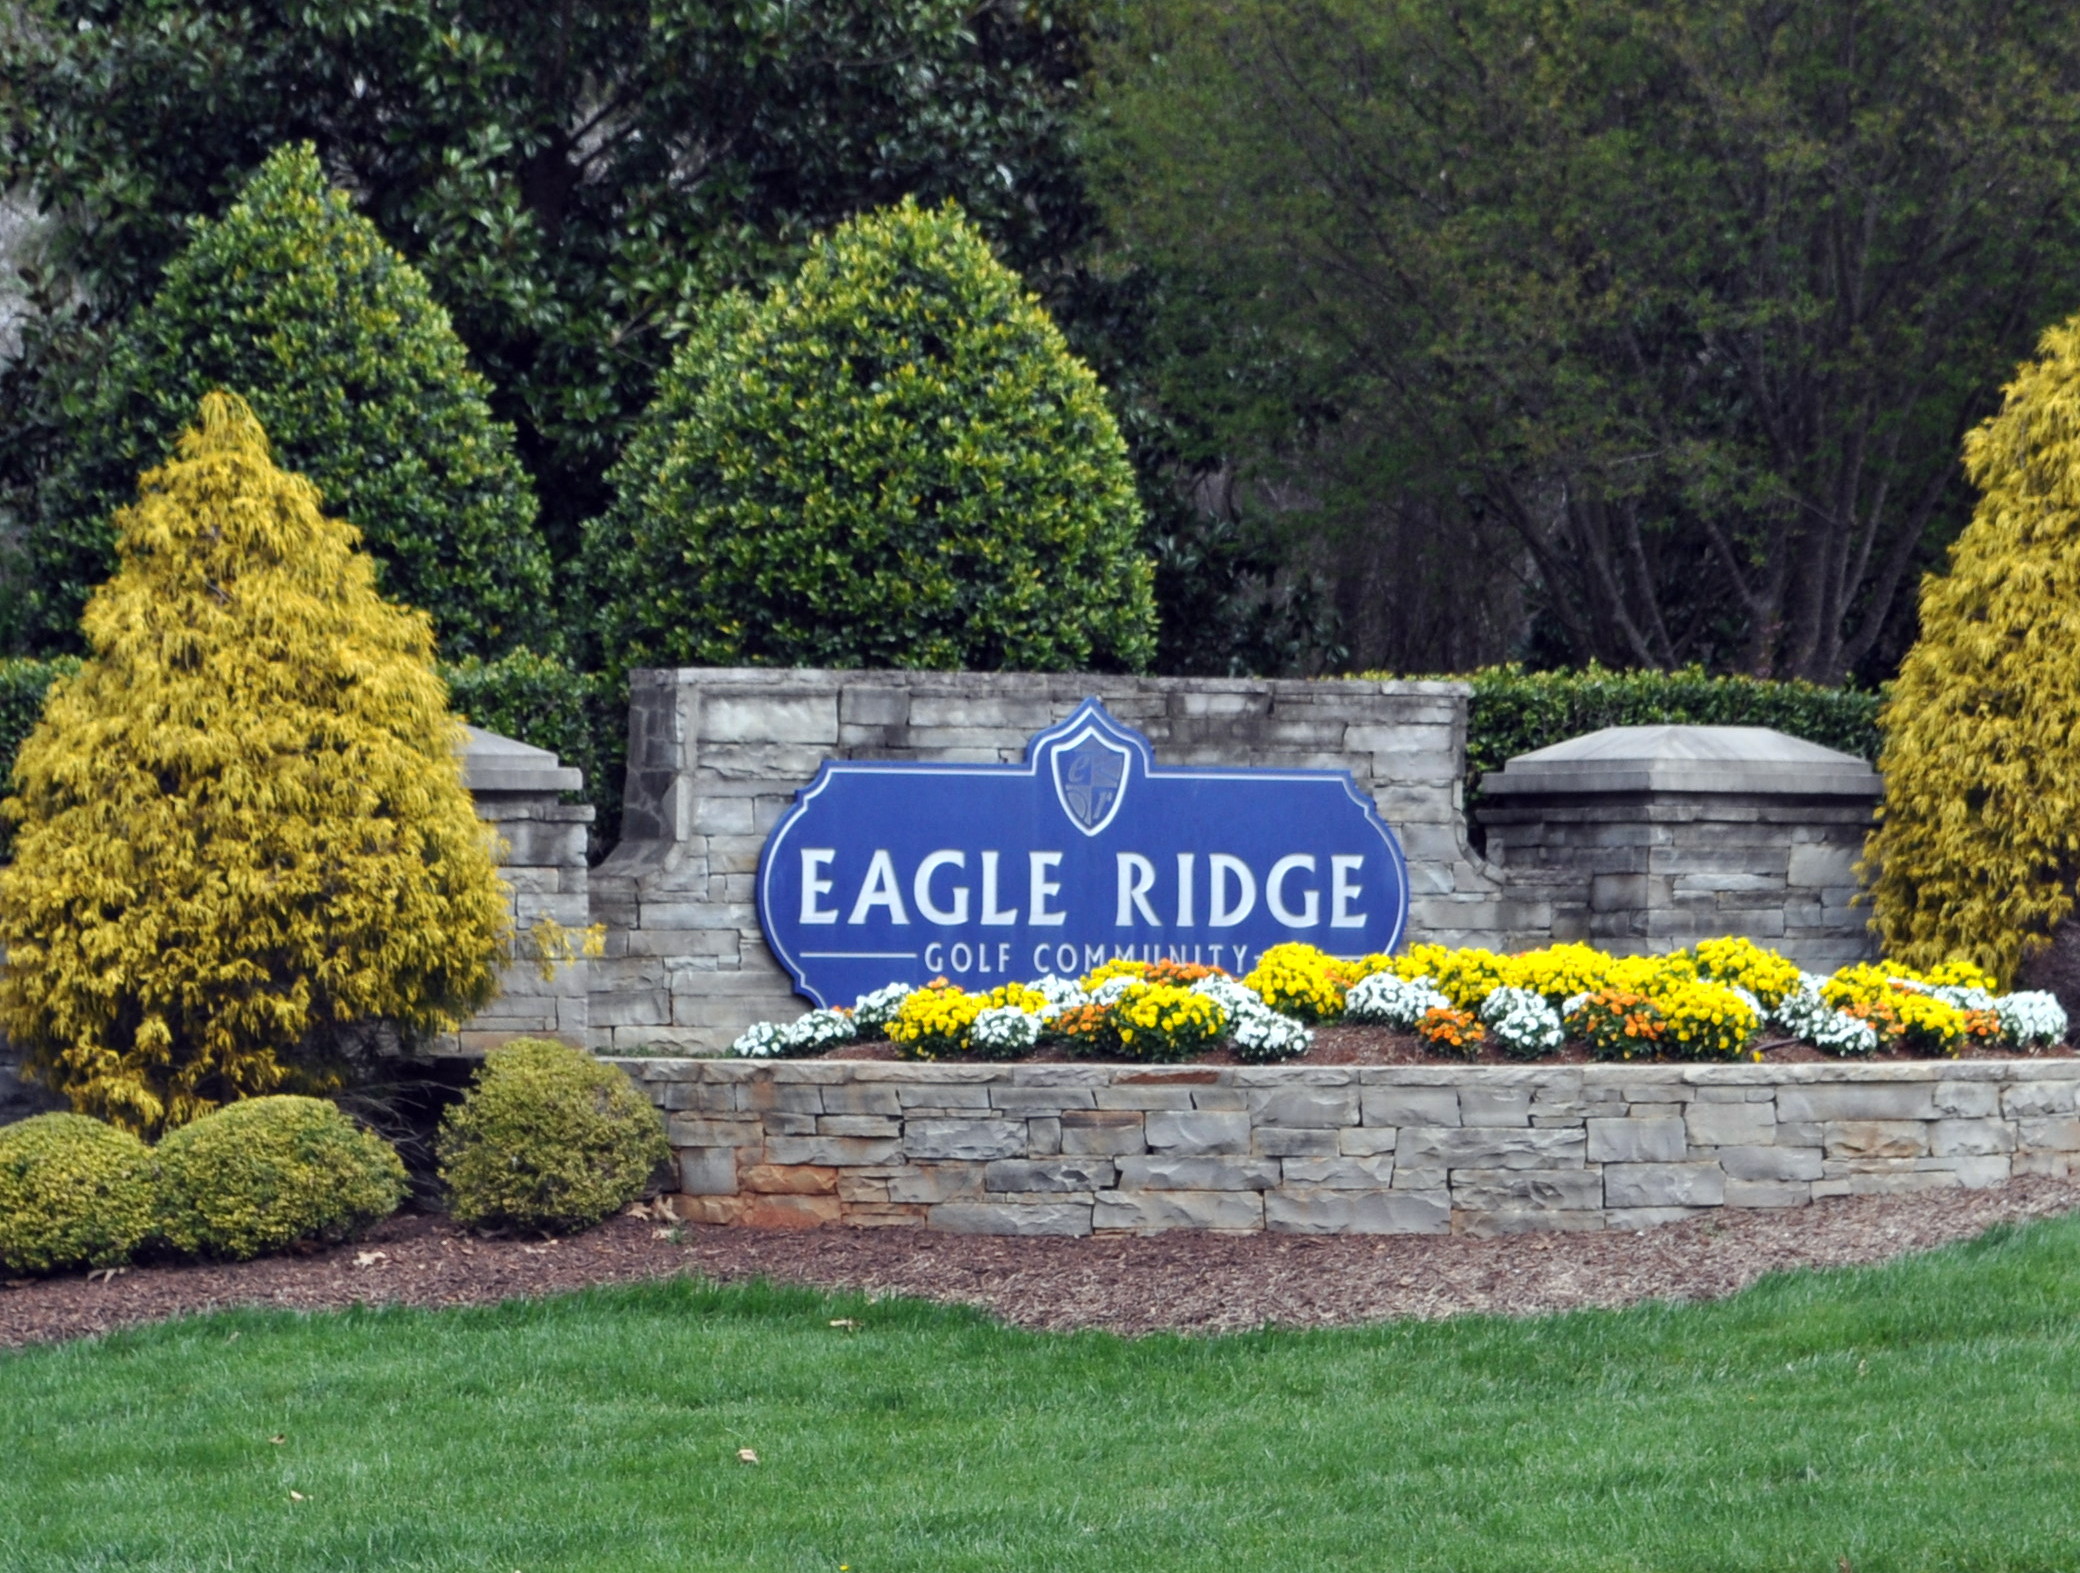 Eagle Ridge Golf Course Homes For Sale – March Update